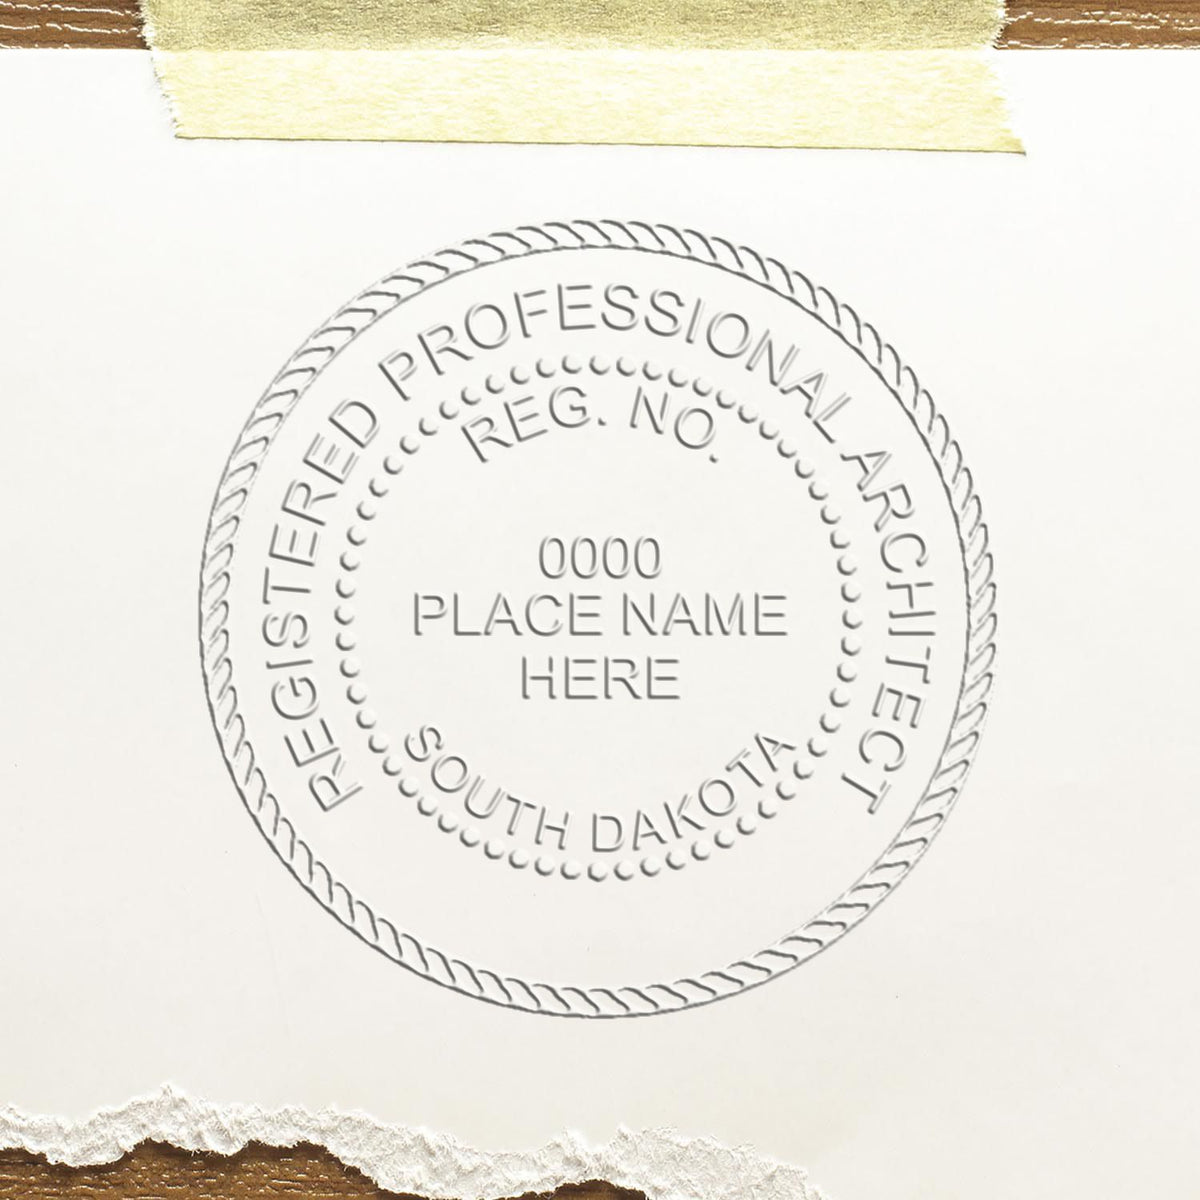 A photograph of the Hybrid South Dakota Architect Seal stamp impression reveals a vivid, professional image of the on paper.